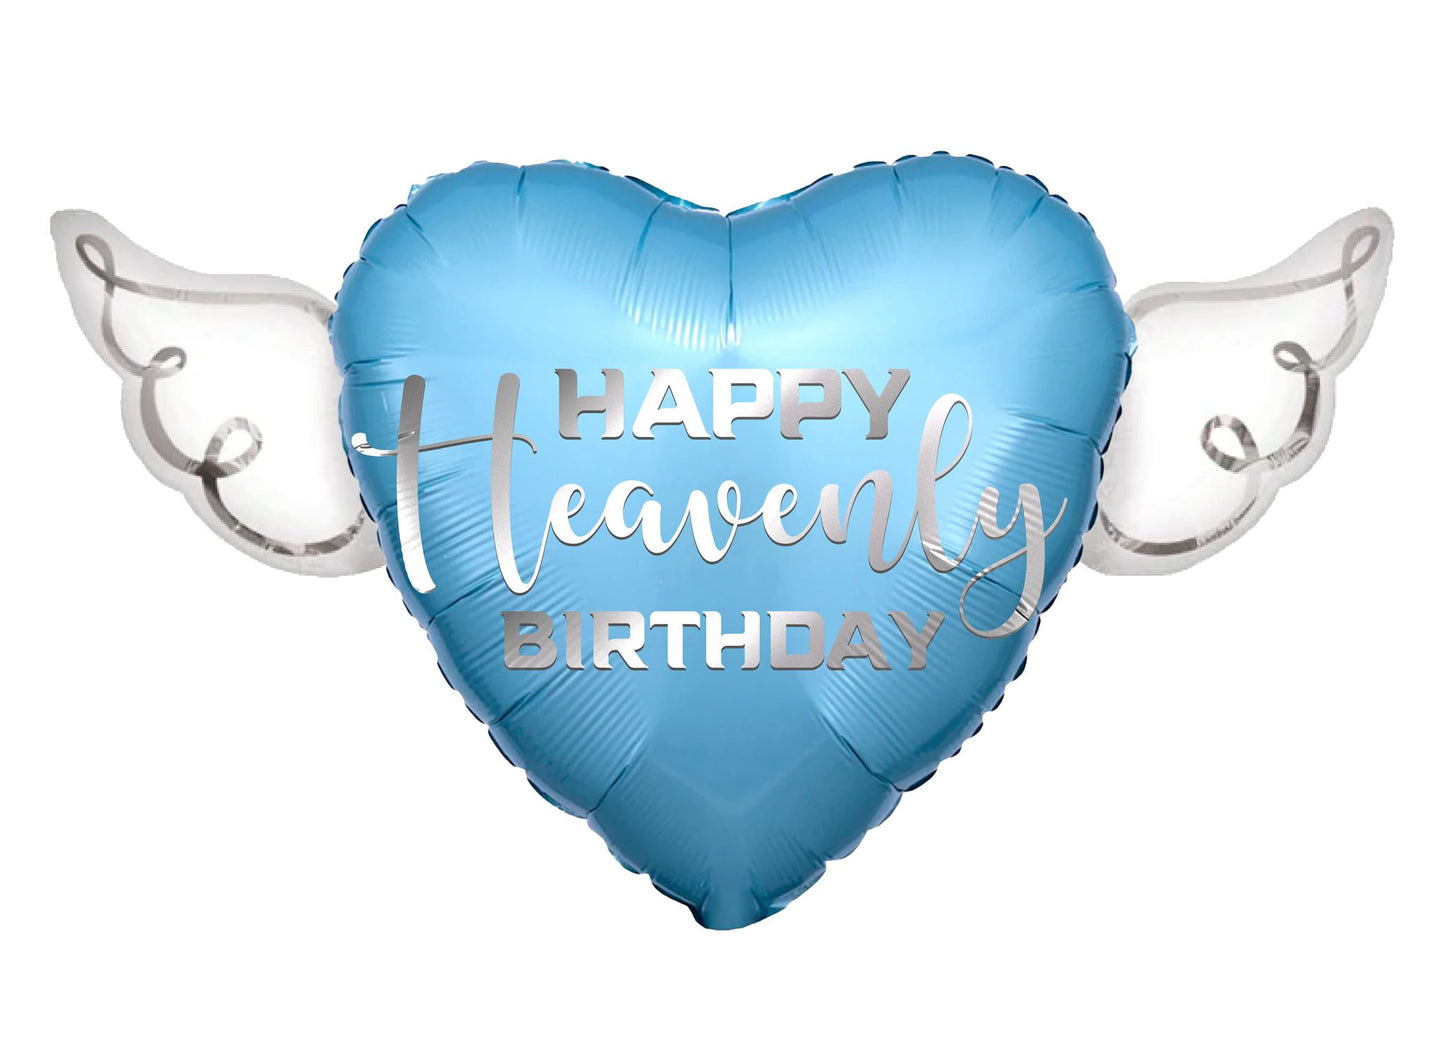 Heart-Shaped Blue Happy Heavenly Birthday Balloon with white angel wings